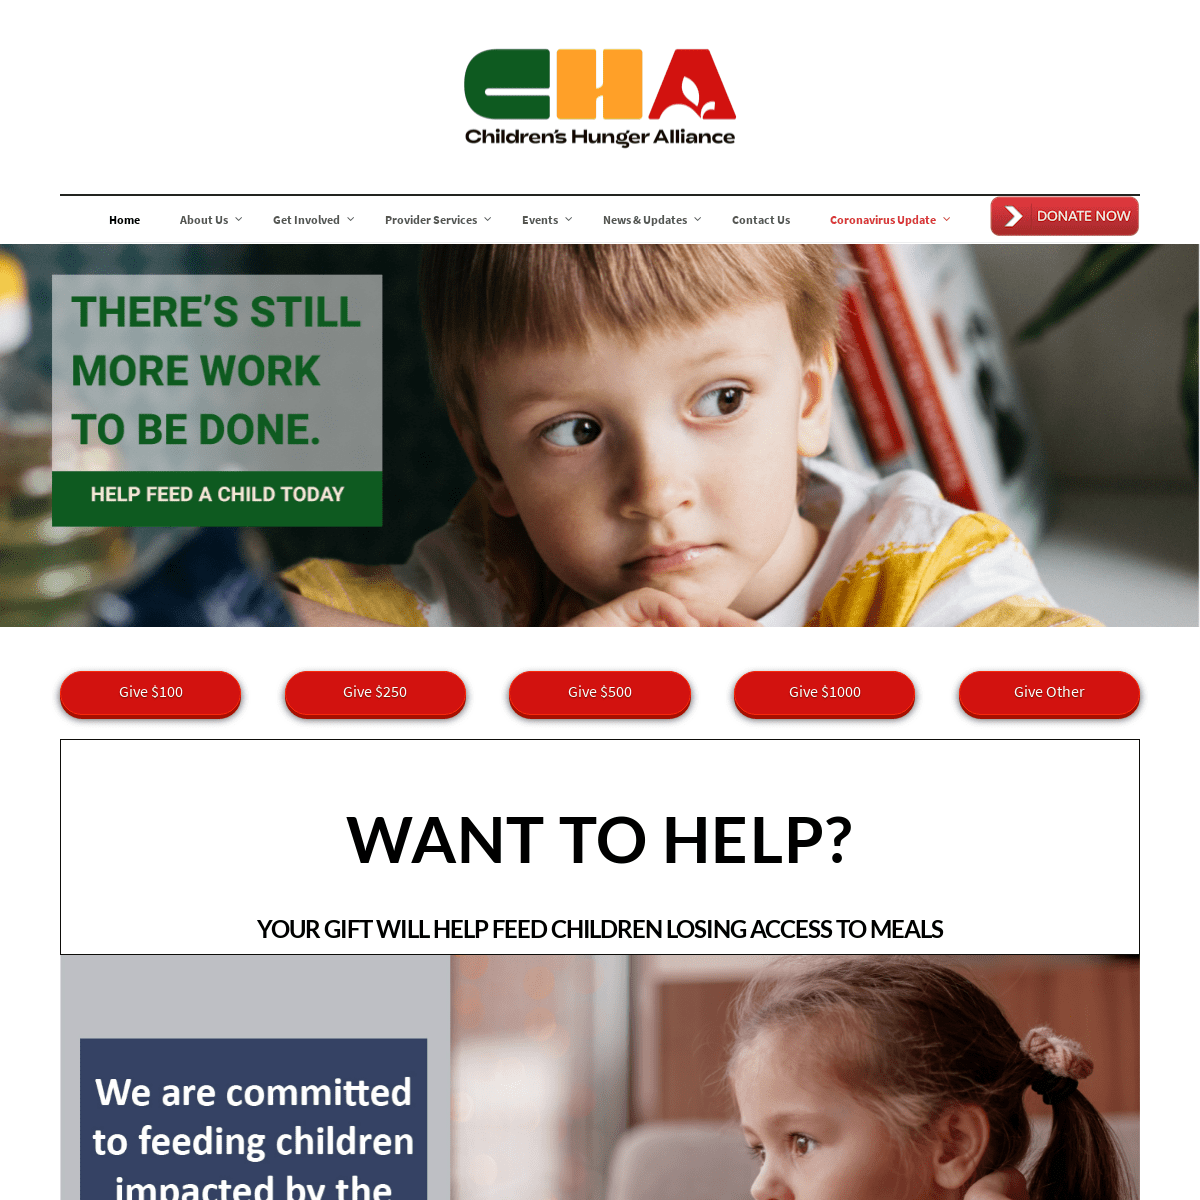 A complete backup of https://childrenshungeralliance.org